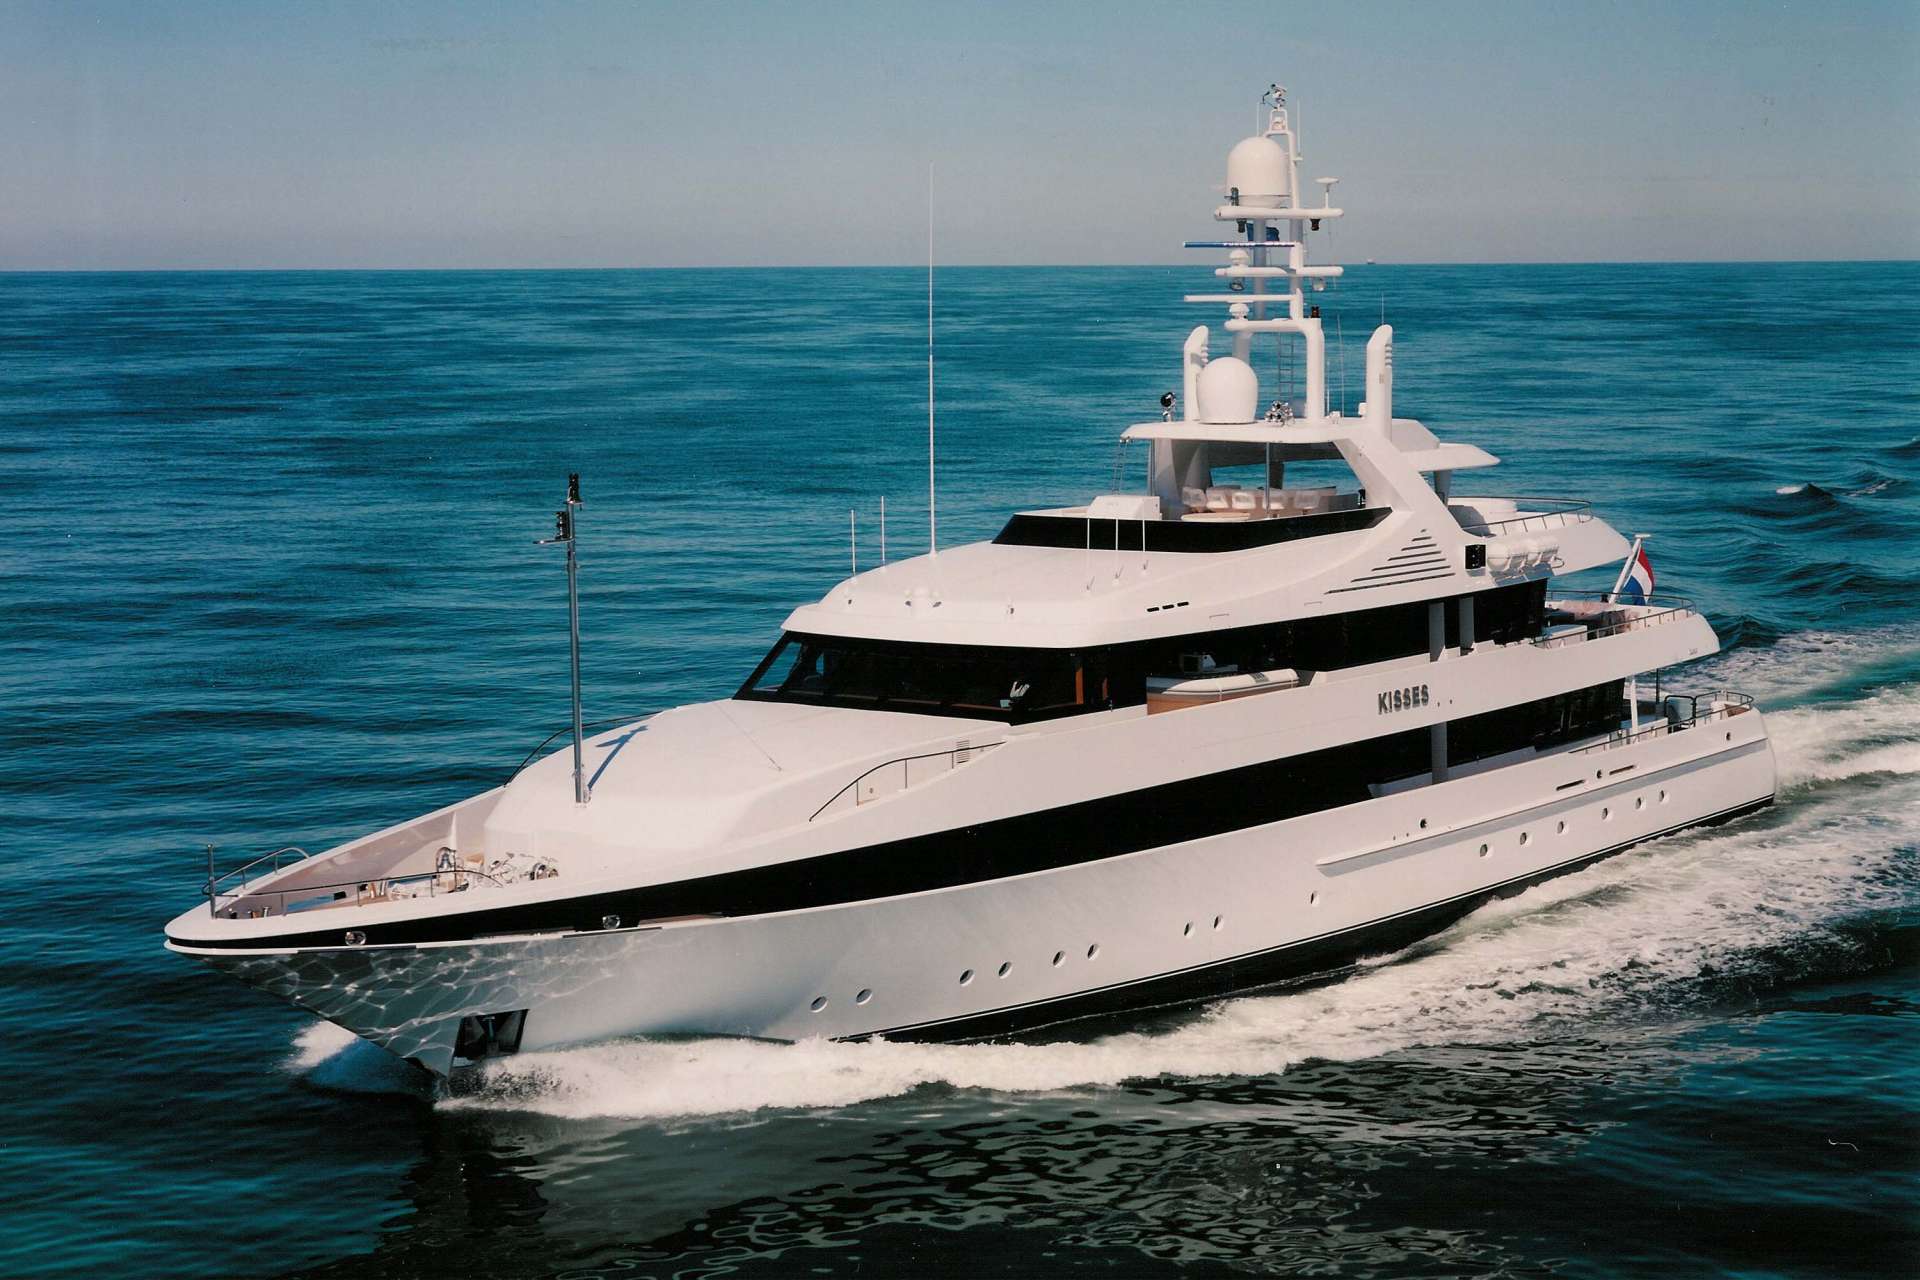 KISSES yacht • Feadship • 2000 • owner Norman Braman